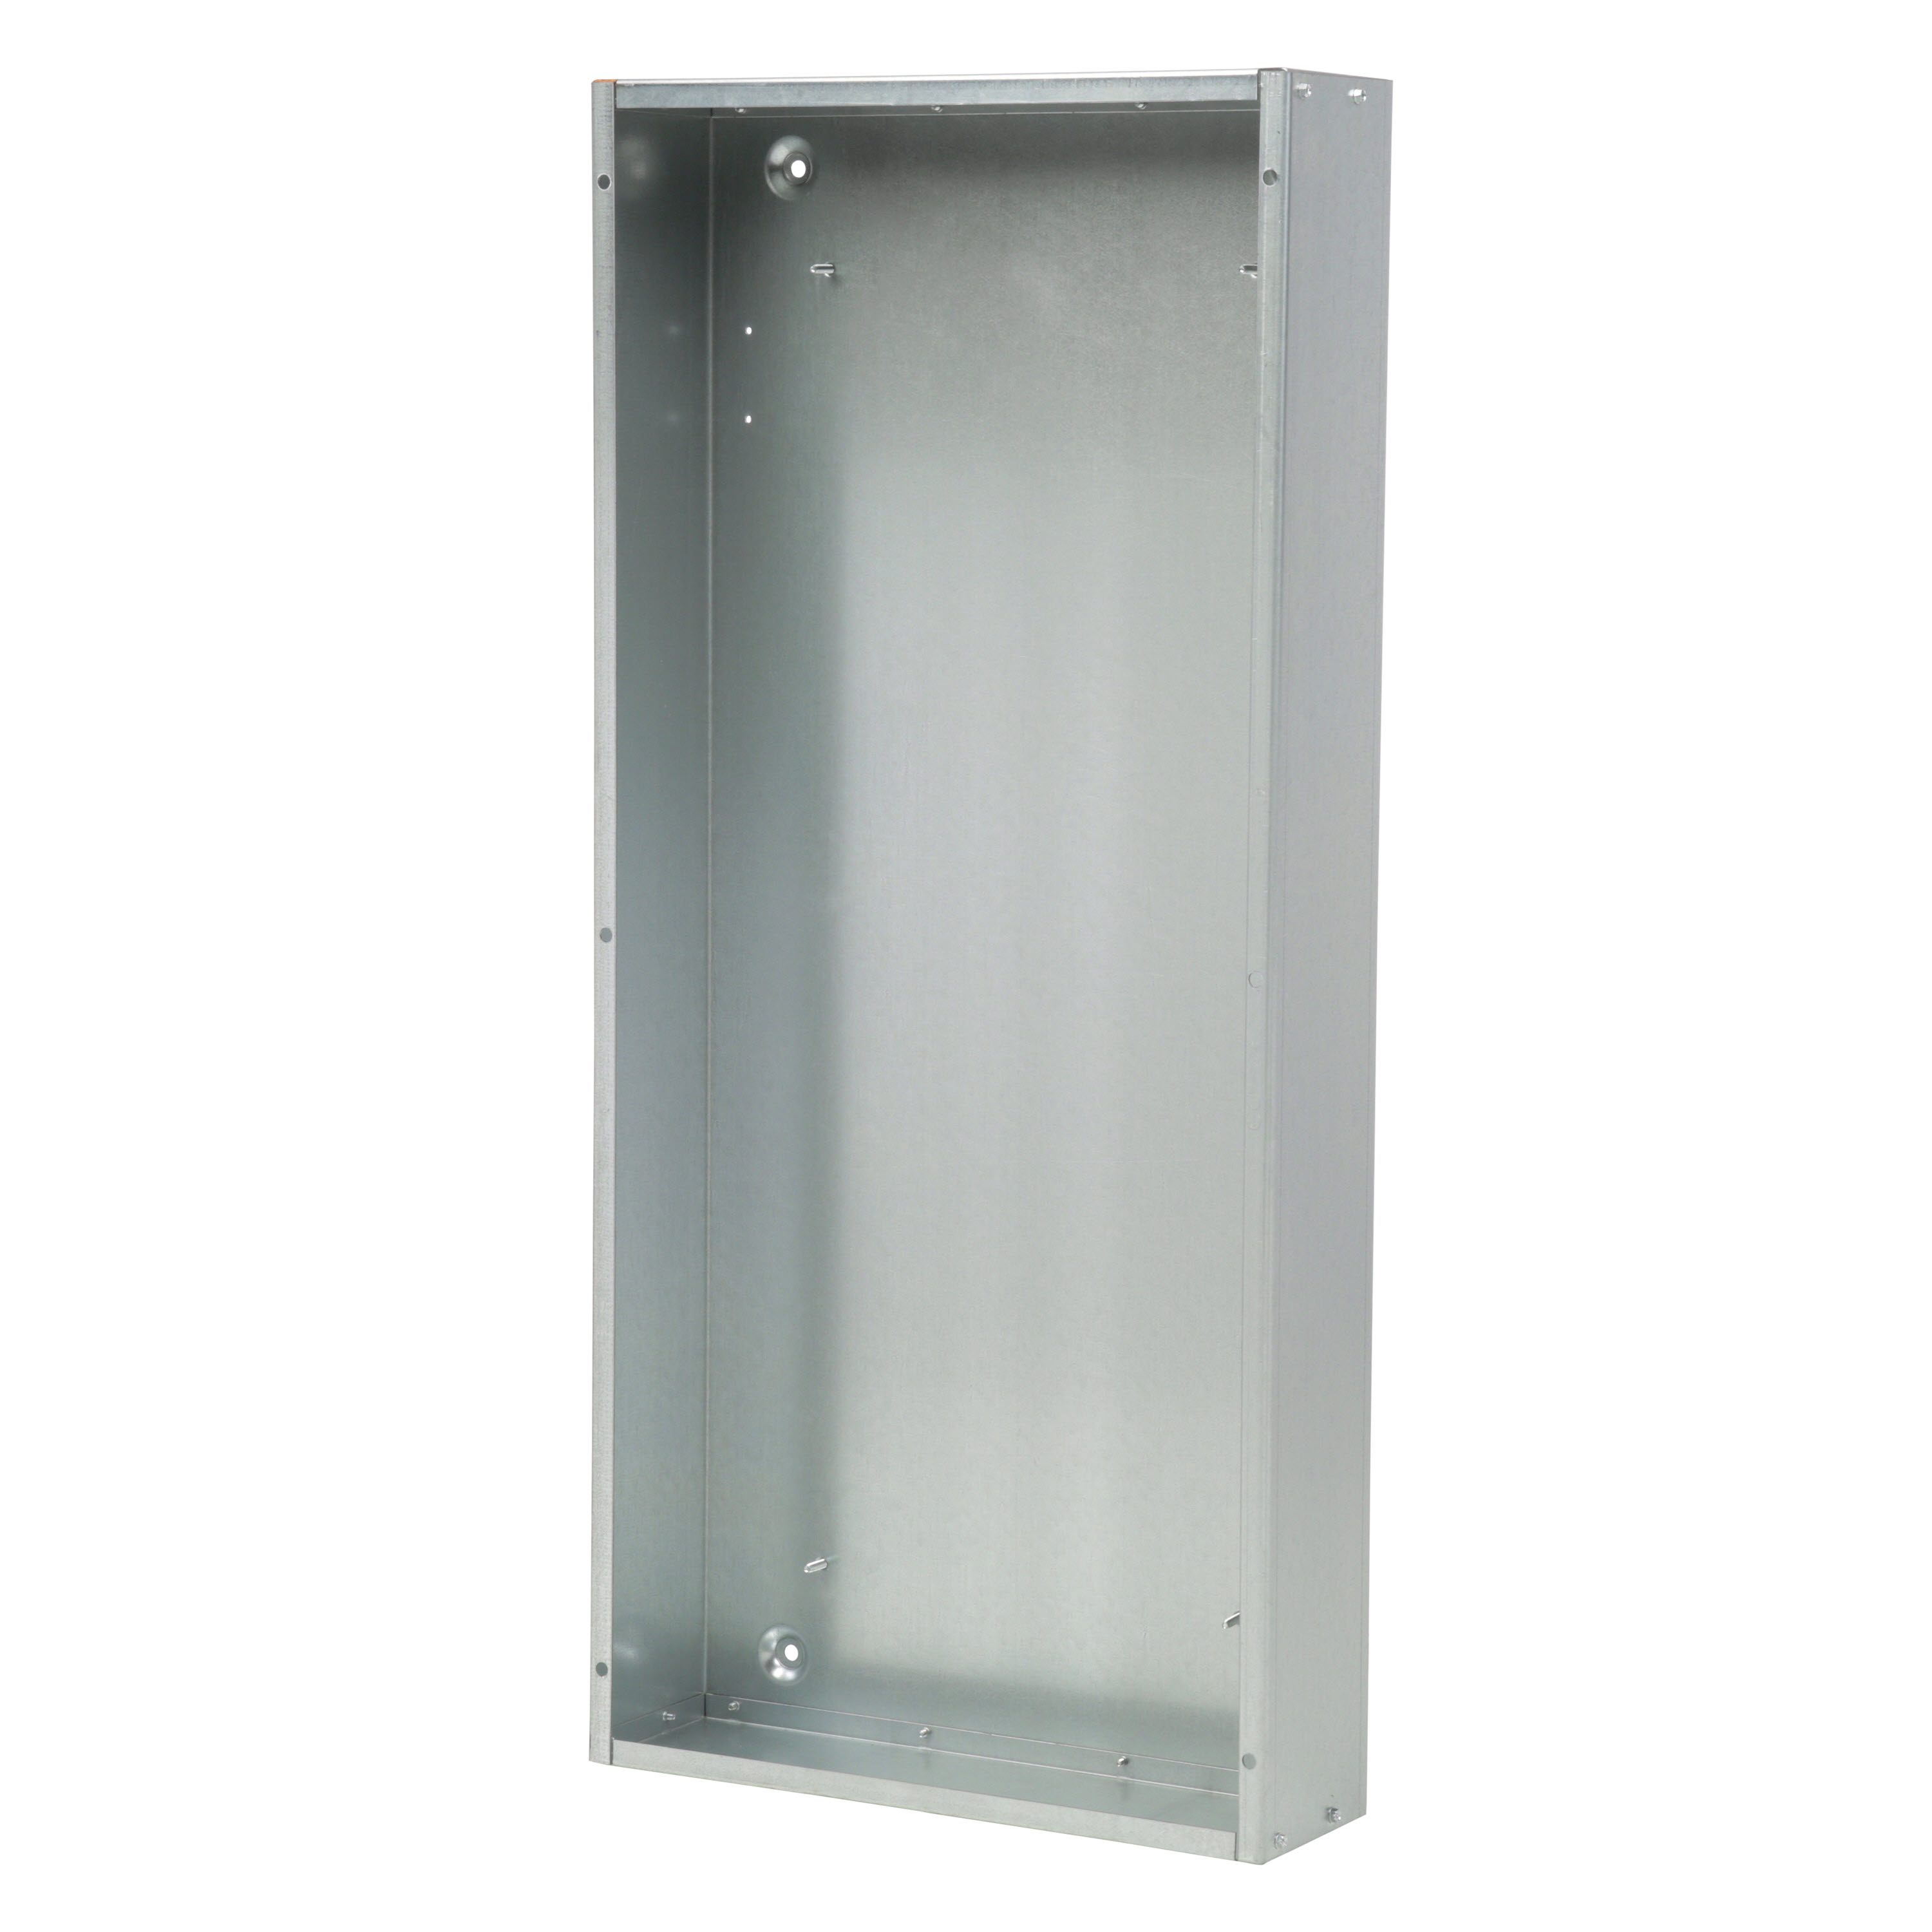 Siemens Low Voltage Unassembled Lighting Panel Parts/accessories. 16 Gauge steel box, 14 gauge steel front built type 1 standard trim enclosure (box mounted). Dimensions (H x W x D) IN 44 x 20 x 5.75. Special features front type FAS-Latch,.